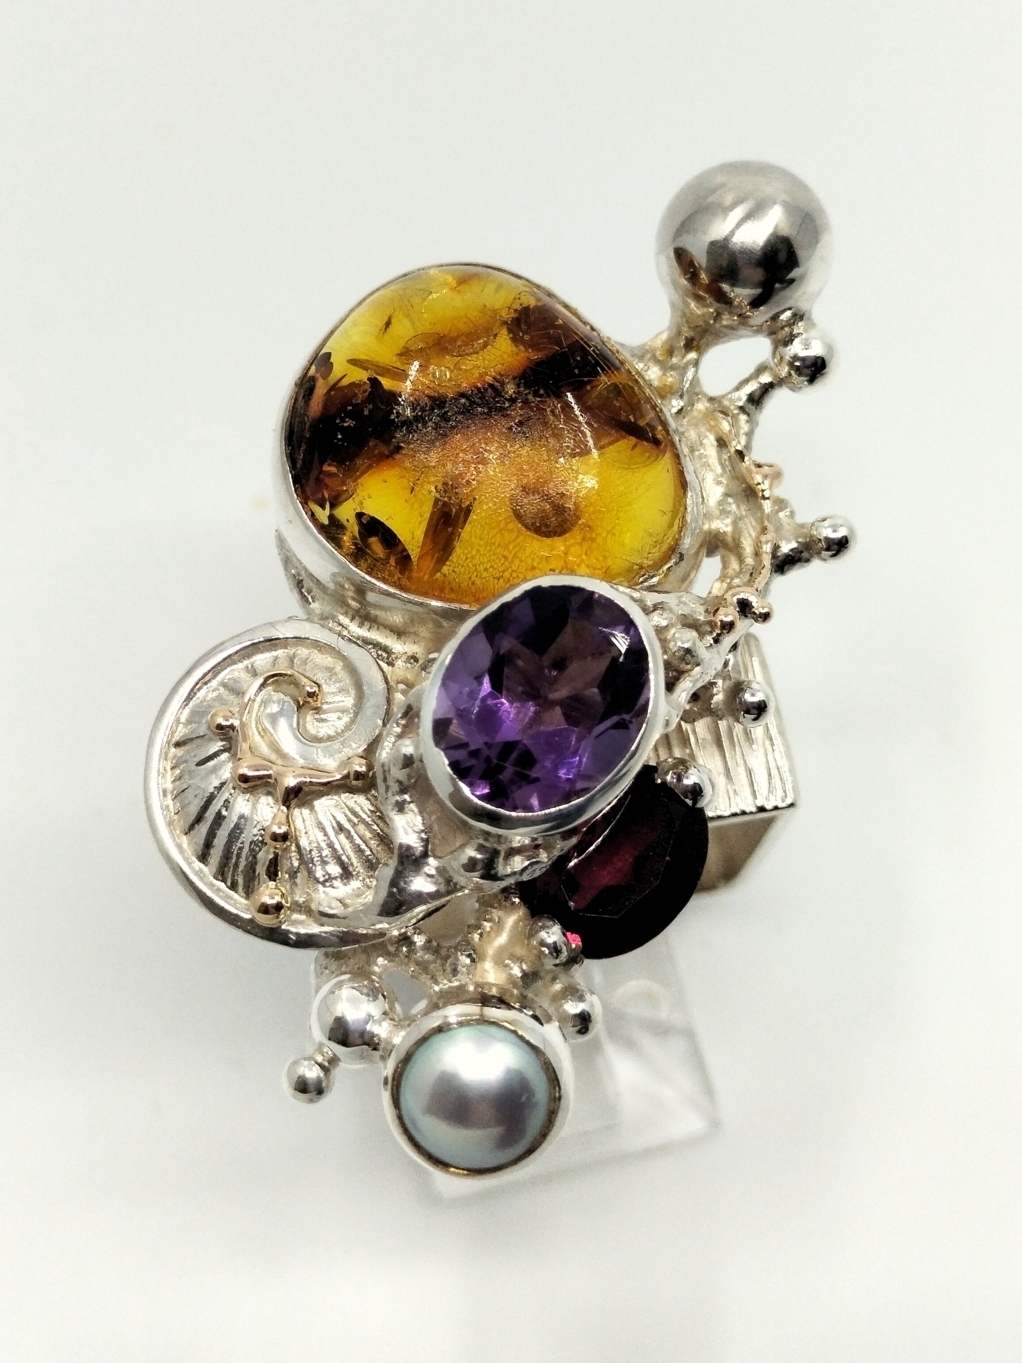 original maker's handcrafted jewellery, gregory pyra piro ring 1710, mixed metal jewelry, 14k gold and silver, sterling silver and 14 karat gold, artist with own style, unique style jewelry, silver and gemstone jewelry, gemstone and pearl jewelry, gold and color gemstone jewelry, amber, garnet, amethyst, pearl, art nouveau inspired fashion jewelry, jewellery with natural pearls and semi precious stones, contemporary jewelry from silver and gold, art jewellery with colour stones, contemporary jewelry with pearls and color stones, jewellery made from silver and gold with natural pearls and natural gemstones, shopping for diamonds and designer jewellery, accessories with color stones and pearls, artisan handcrafted jewellery with natural gemstones and natural pearls, jewelry made first hand, art and craft gallery artisan handcrafted jewellery for sale, jewellery with ocean and seashell theme